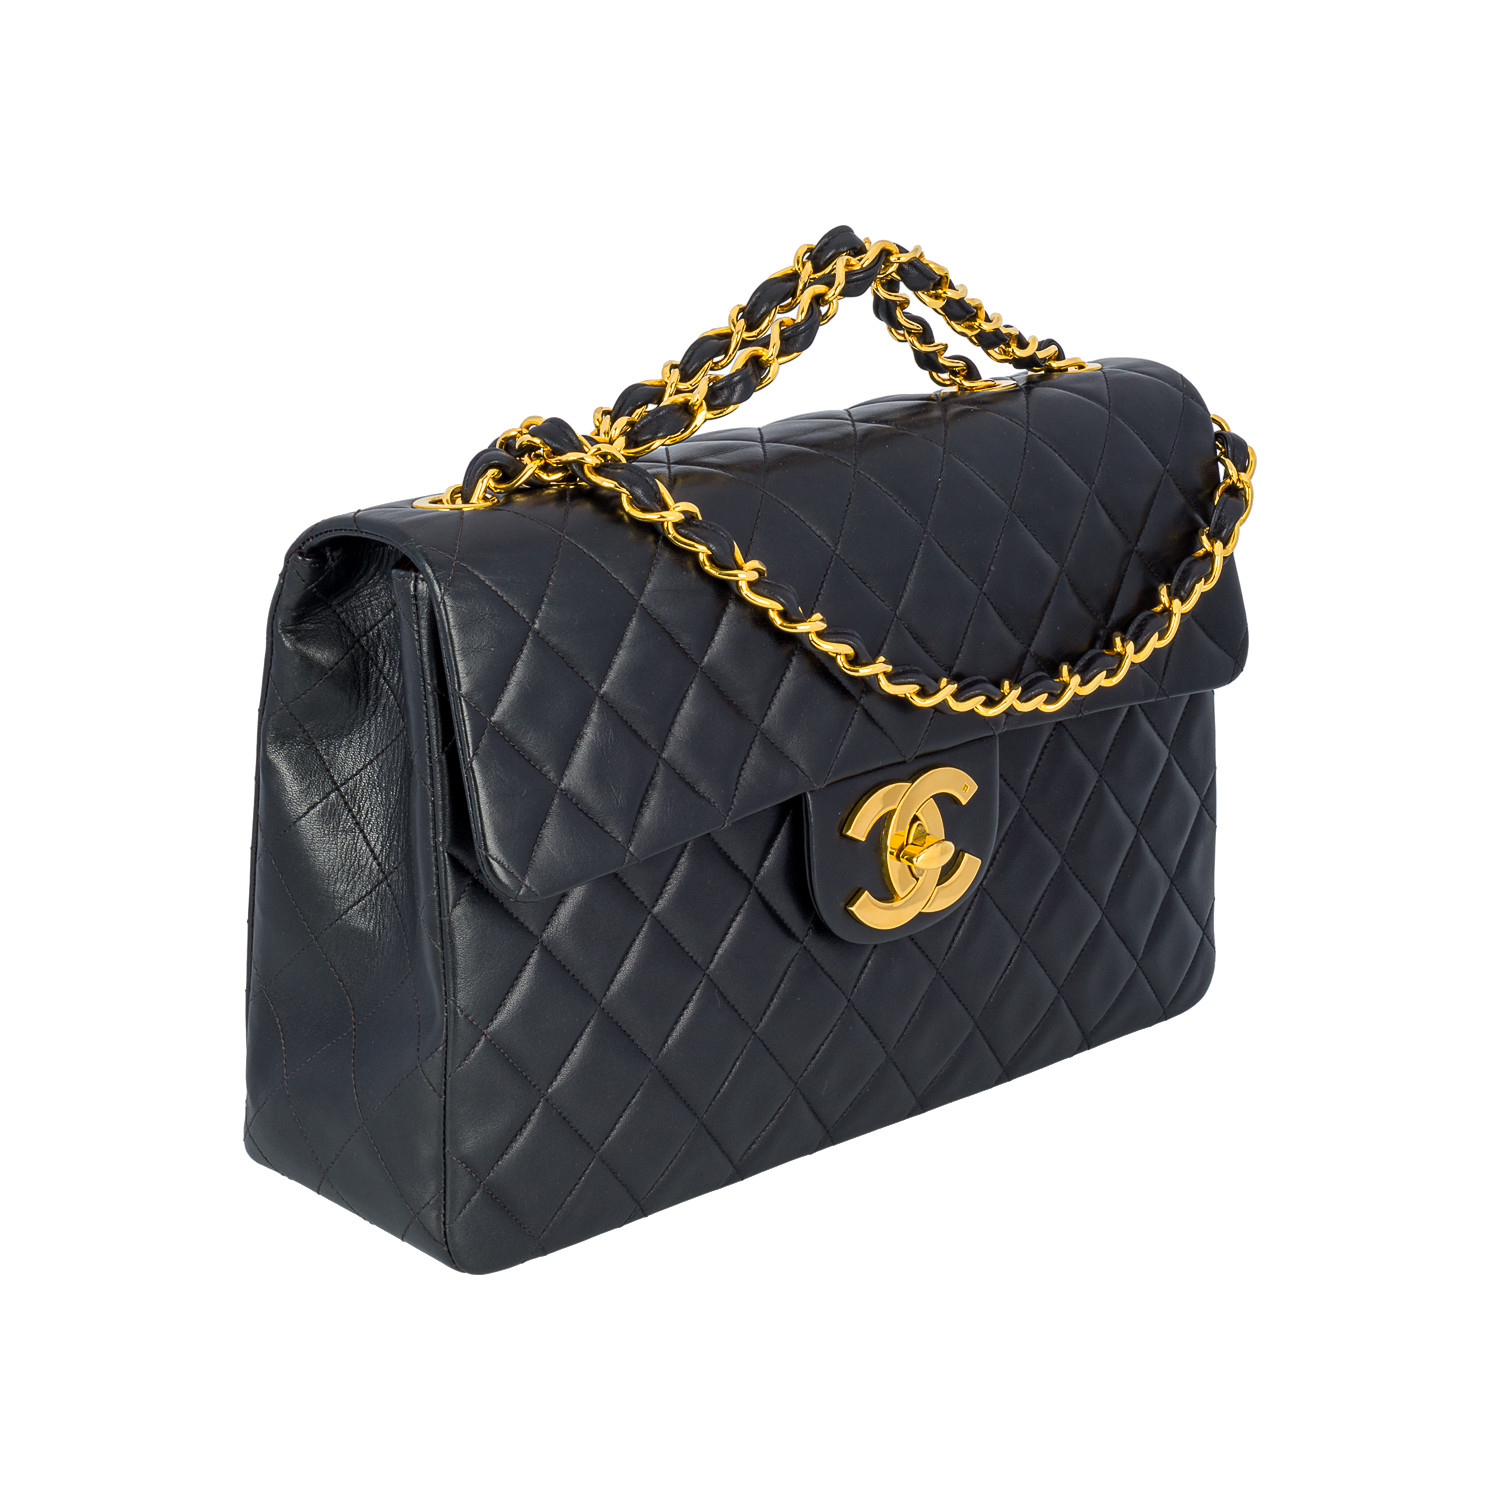 Chanel // Vintage Jumbo Flap Bag // Black // Pre-Owned - Chanel, Louis Vuitton, & More - Touch ...